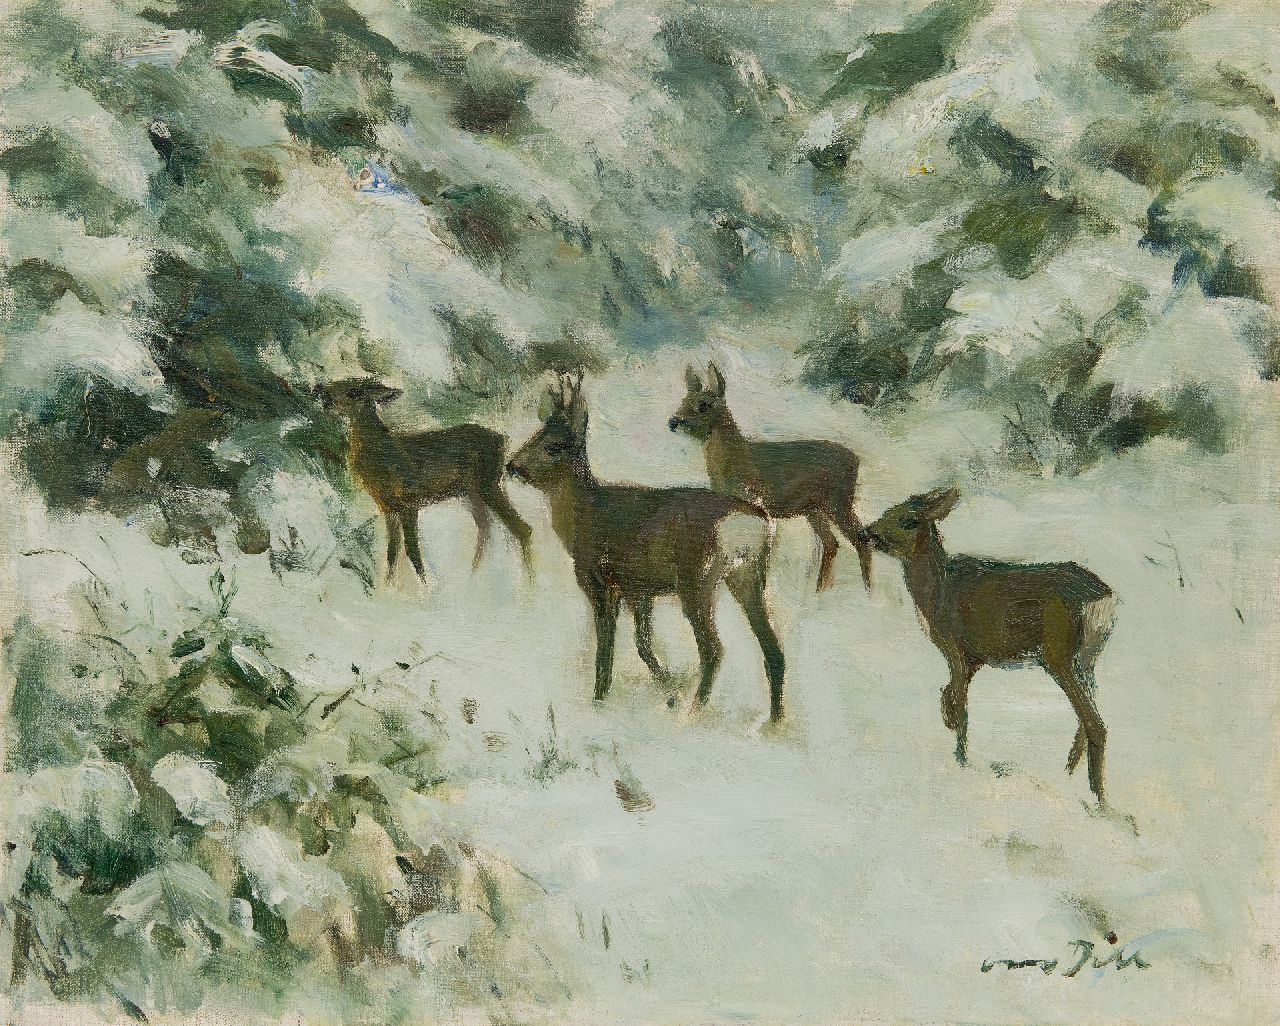 Dill O.C.W.  | Otto Carl Wilhelm Dill | Paintings offered for sale | Deer in the snow, oil on canvas 40.2 x 50.0 cm, signed l.r.